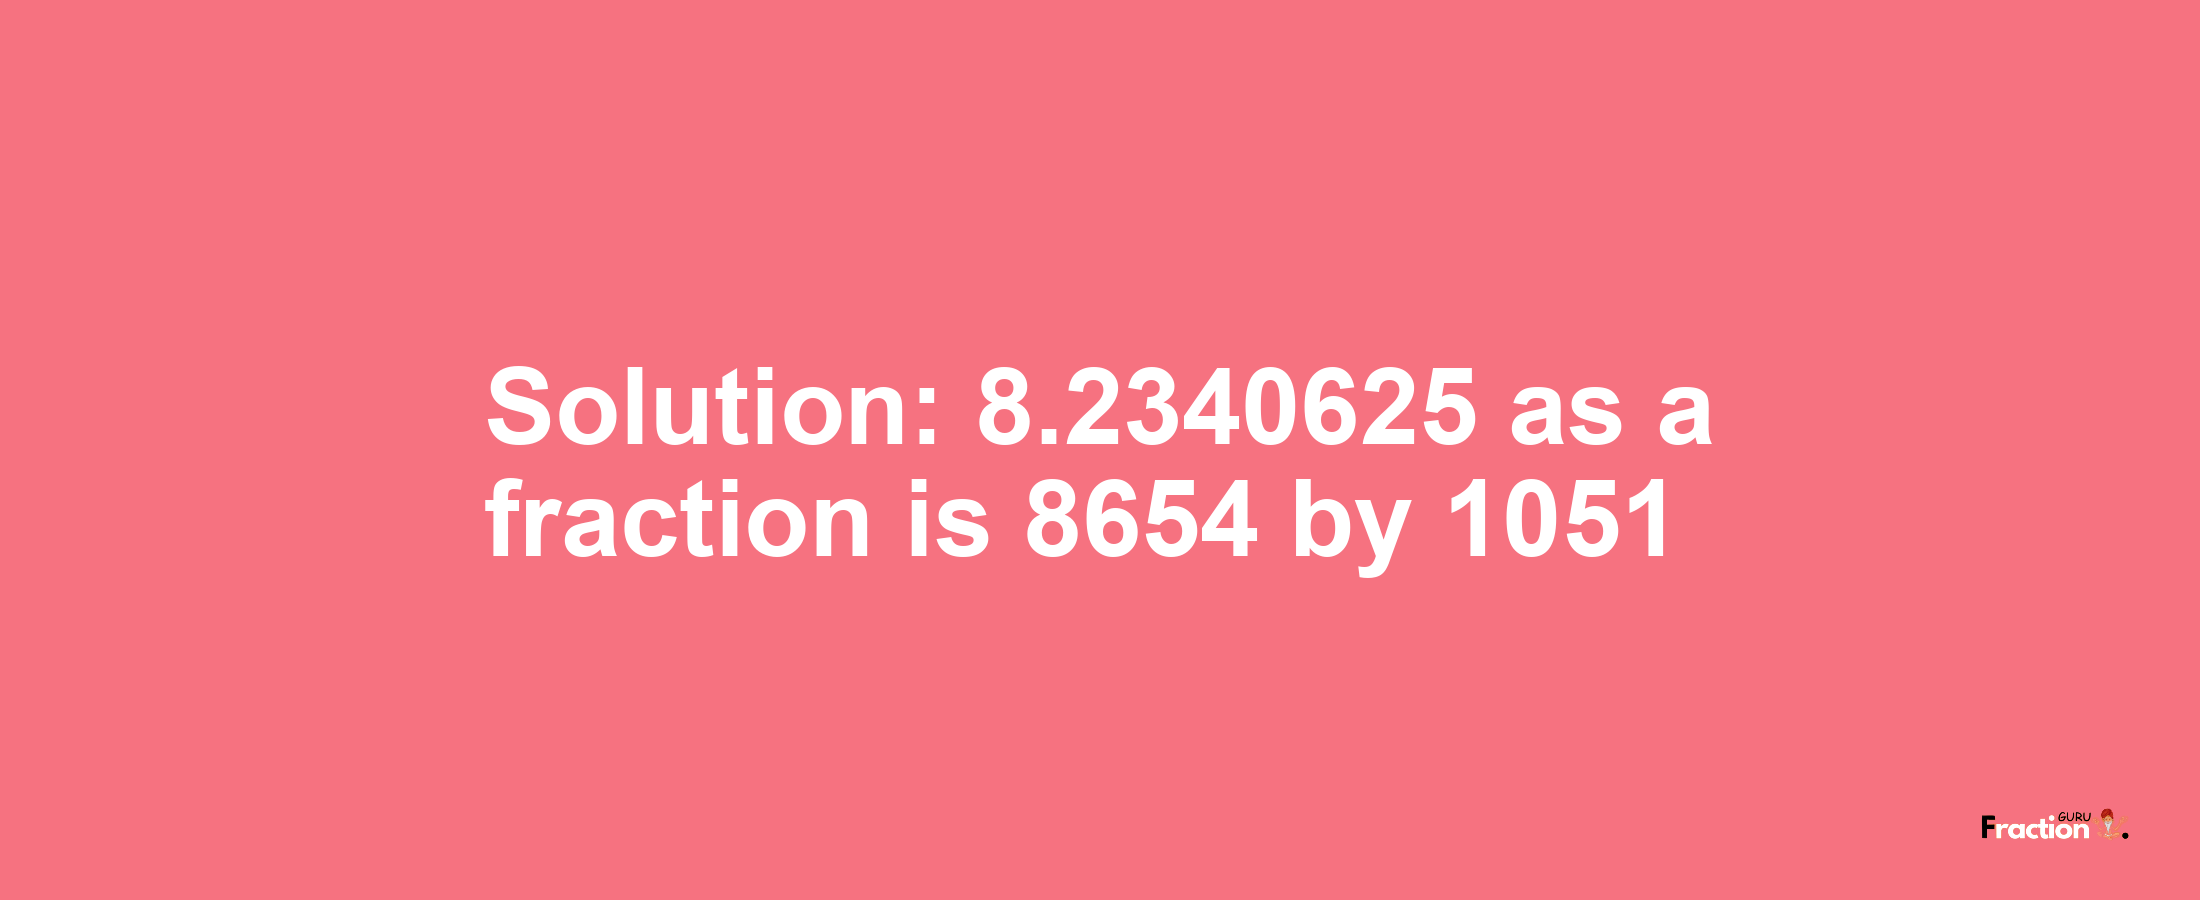 Solution:8.2340625 as a fraction is 8654/1051